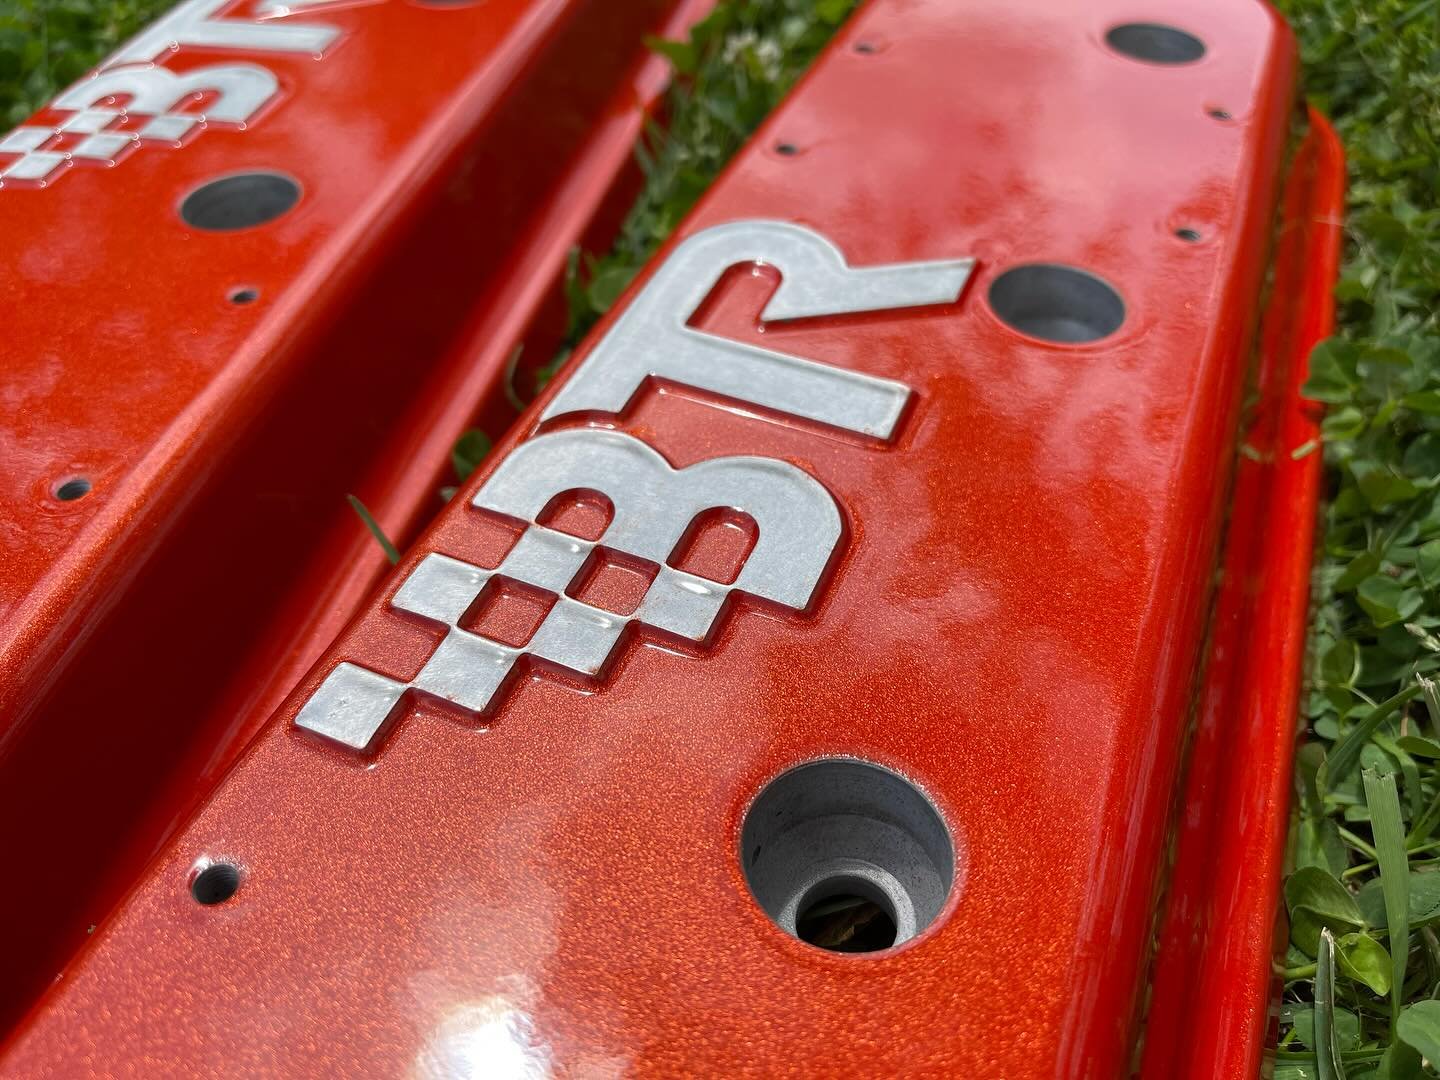 Some @briantooleyracing valve covers refinished in @prismaticpowders illusion red for the man @ls7nando 🤘🤘
.
.
.
.
#powdercoating #powdercoated #briantooleyracing #btr #ls #lsswap #ls7 #camaro #z28 #ss #dynamicpowder #dynamicpowdercoating #dynamicp